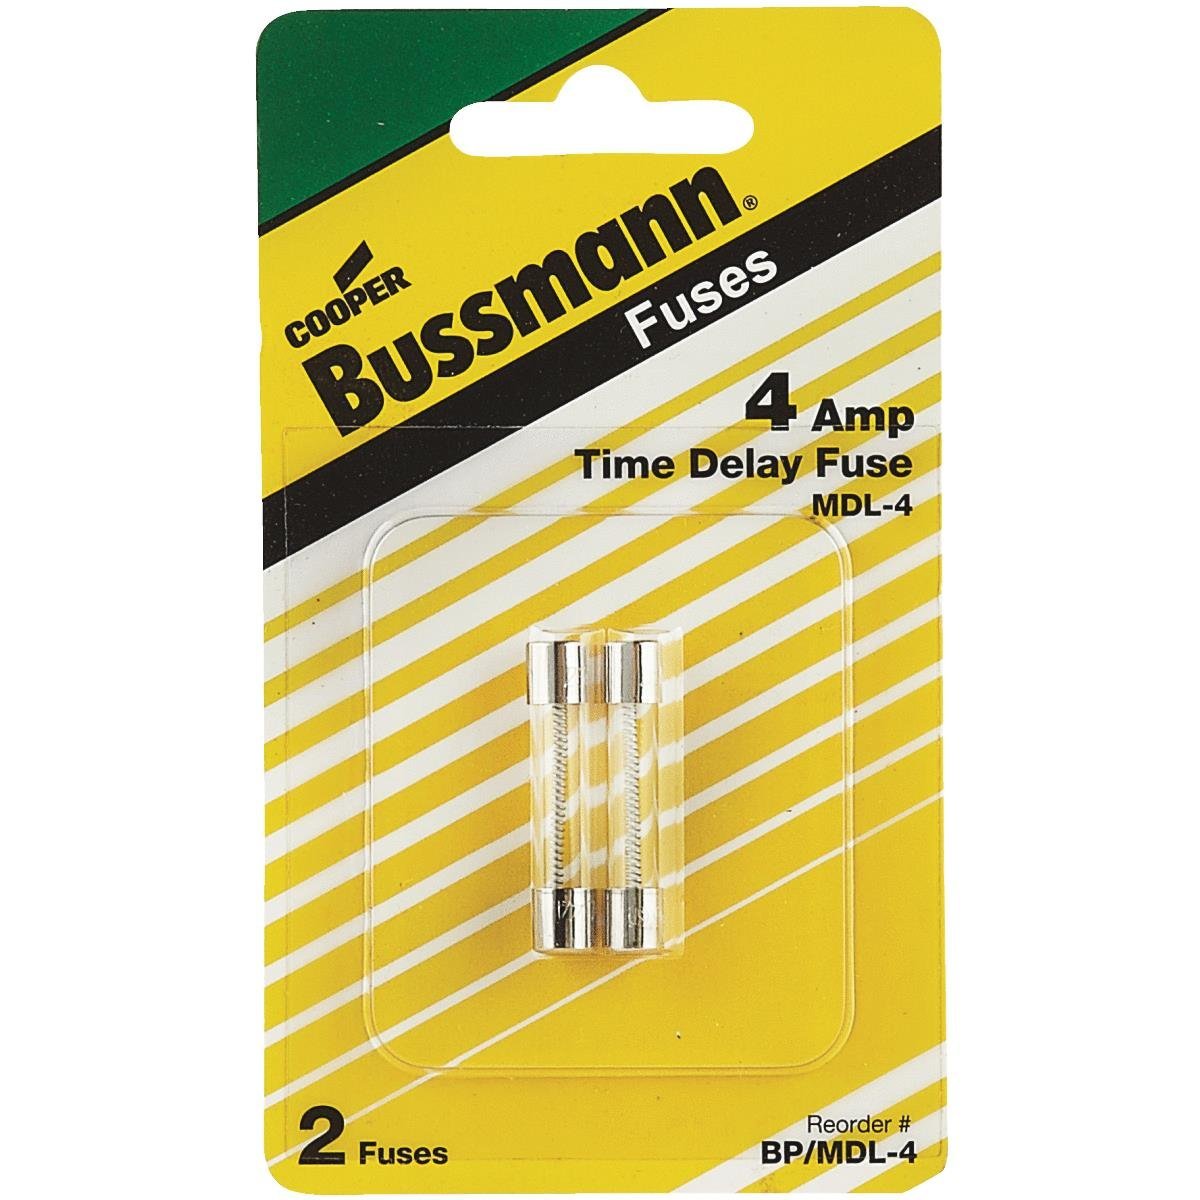 Eaton Cooper-bussman Bp-mdl-4 4 A Electronic Fuse Time Delay